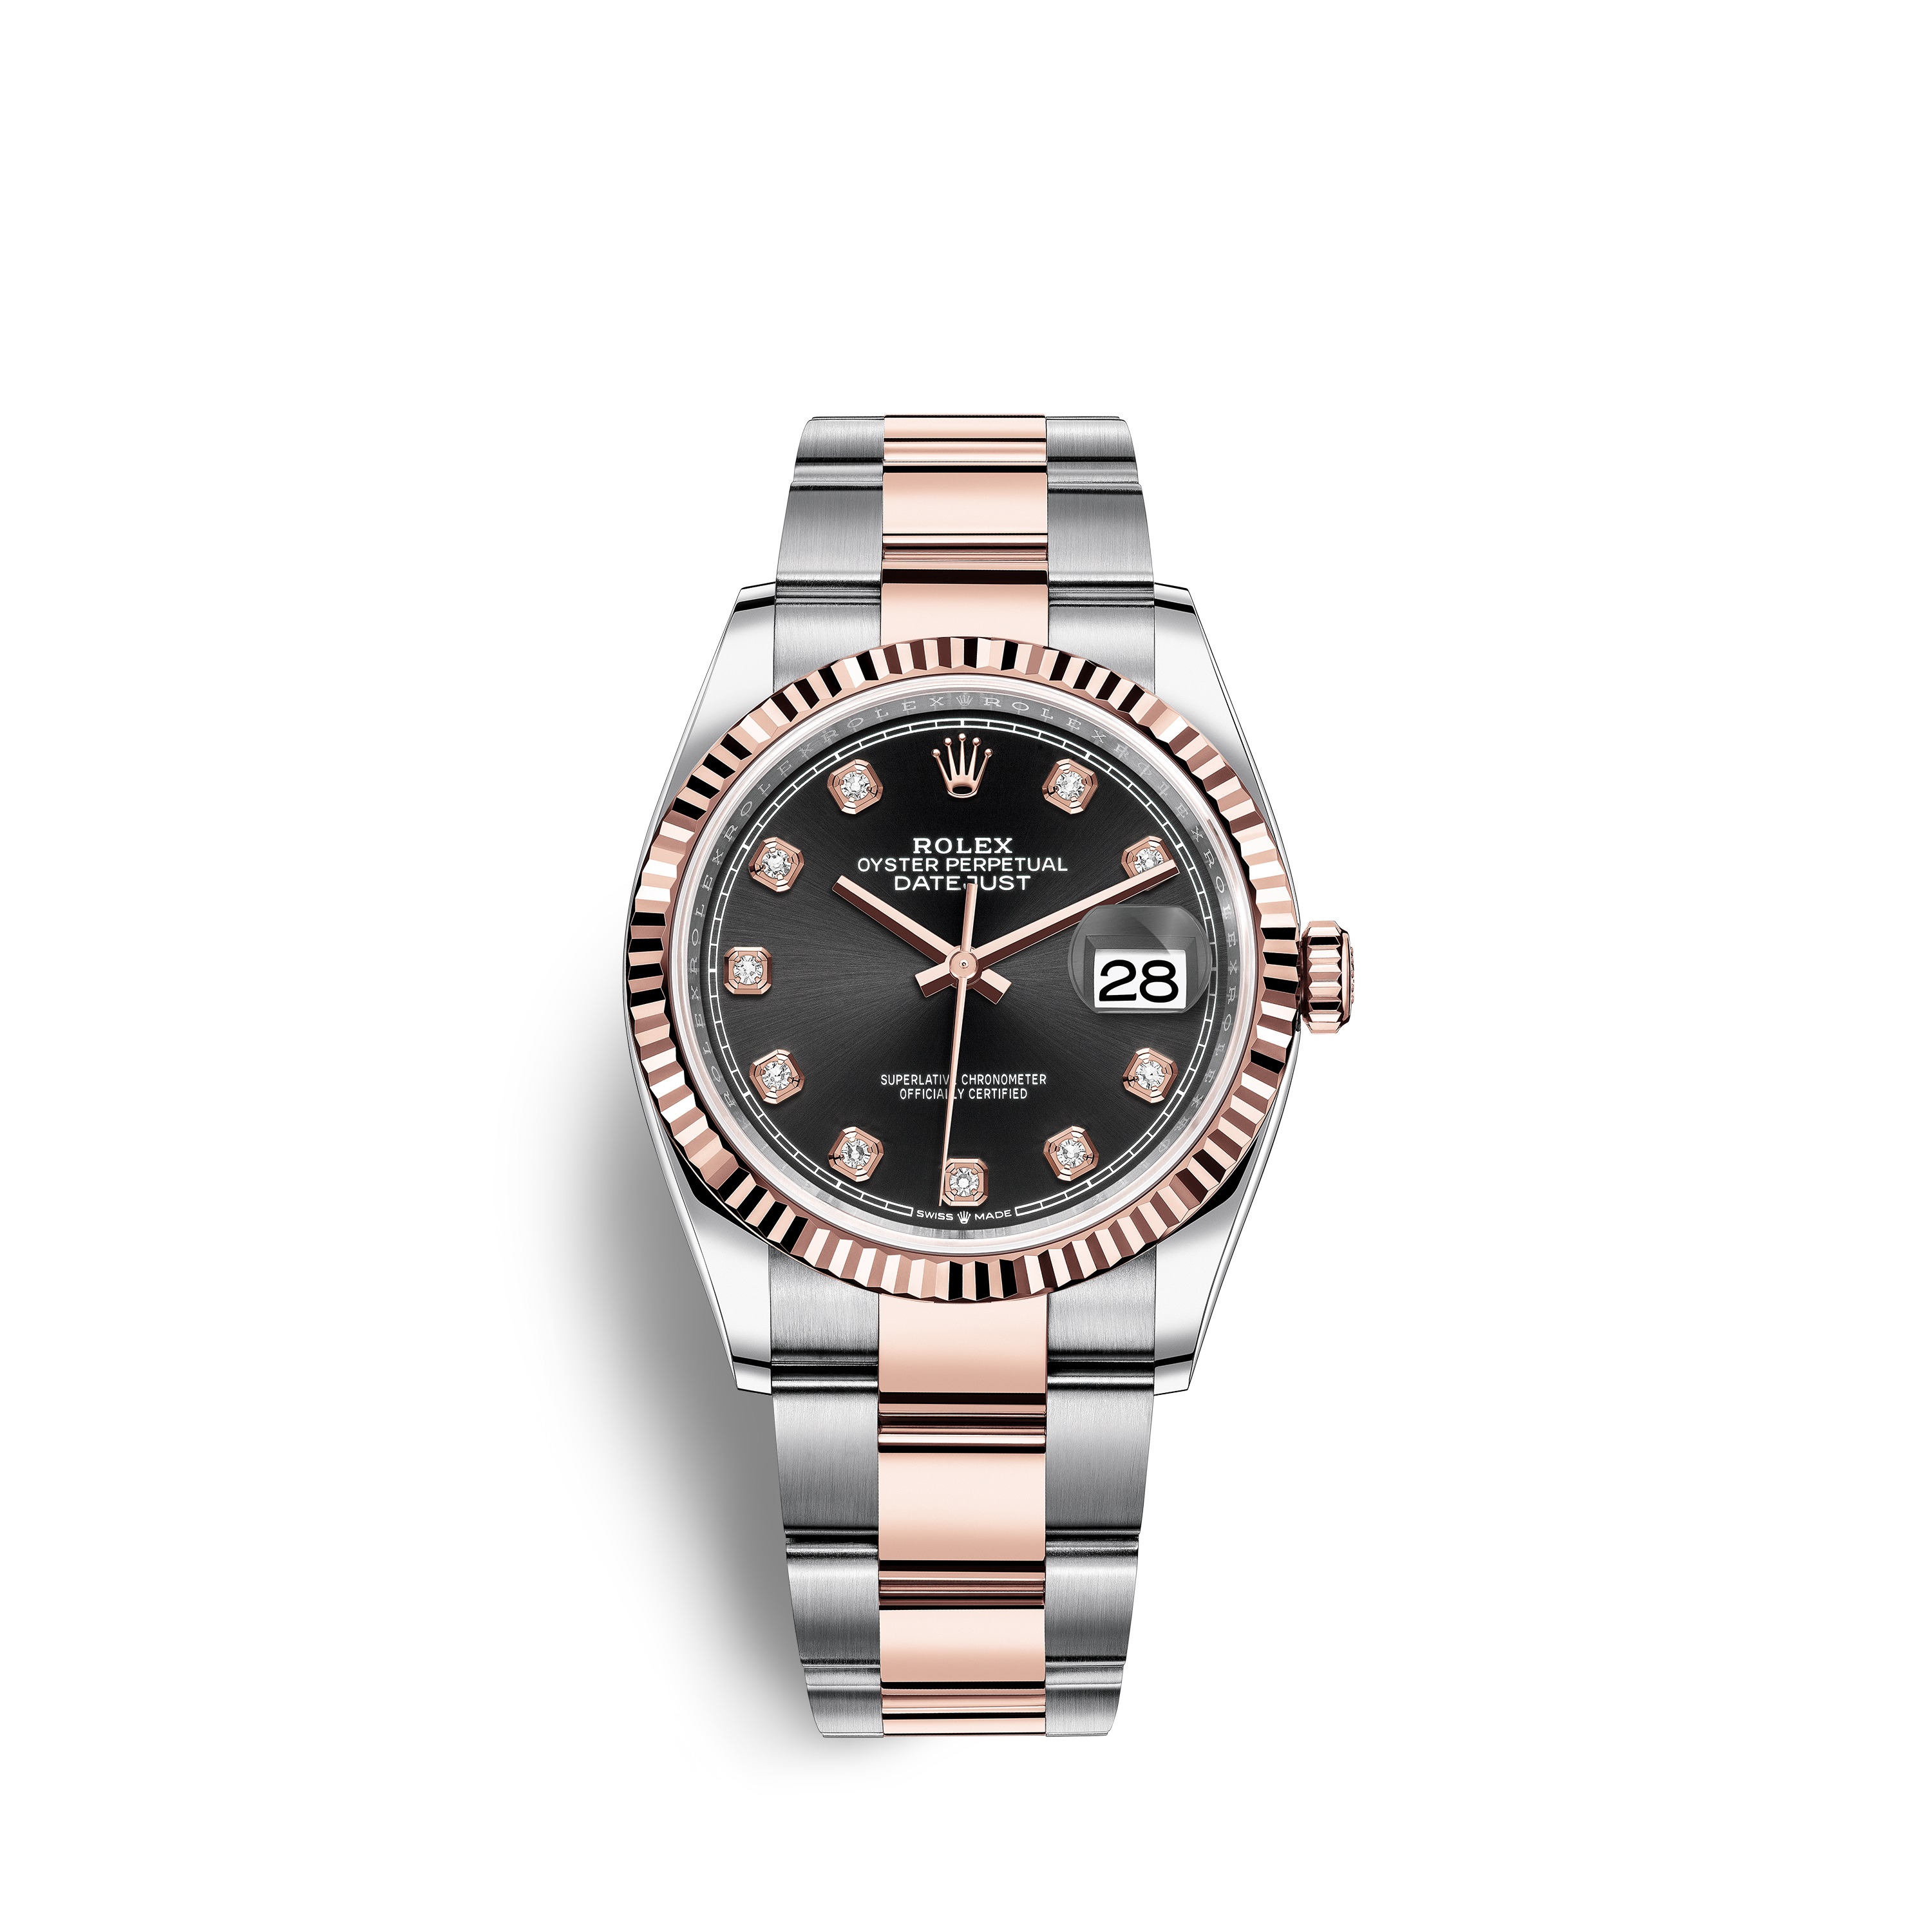 Datejust 36 126231 Rose Gold & Stainless Steel Watch (Black Set with Diamonds) - Click Image to Close